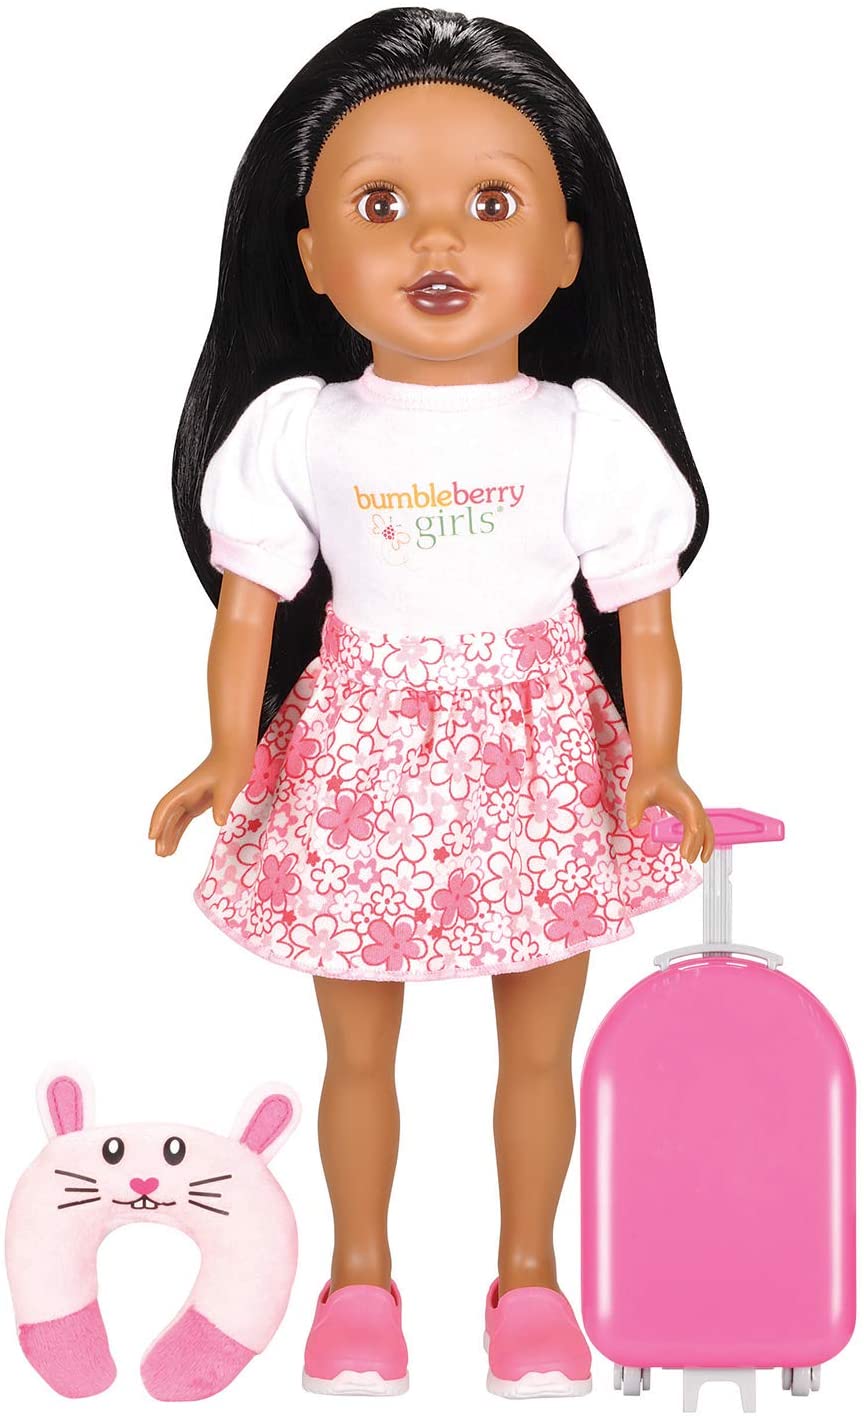 15" Bumbleberry Girls Travel Set Doll - (Danica, African American) $7.55 & More - Amazon